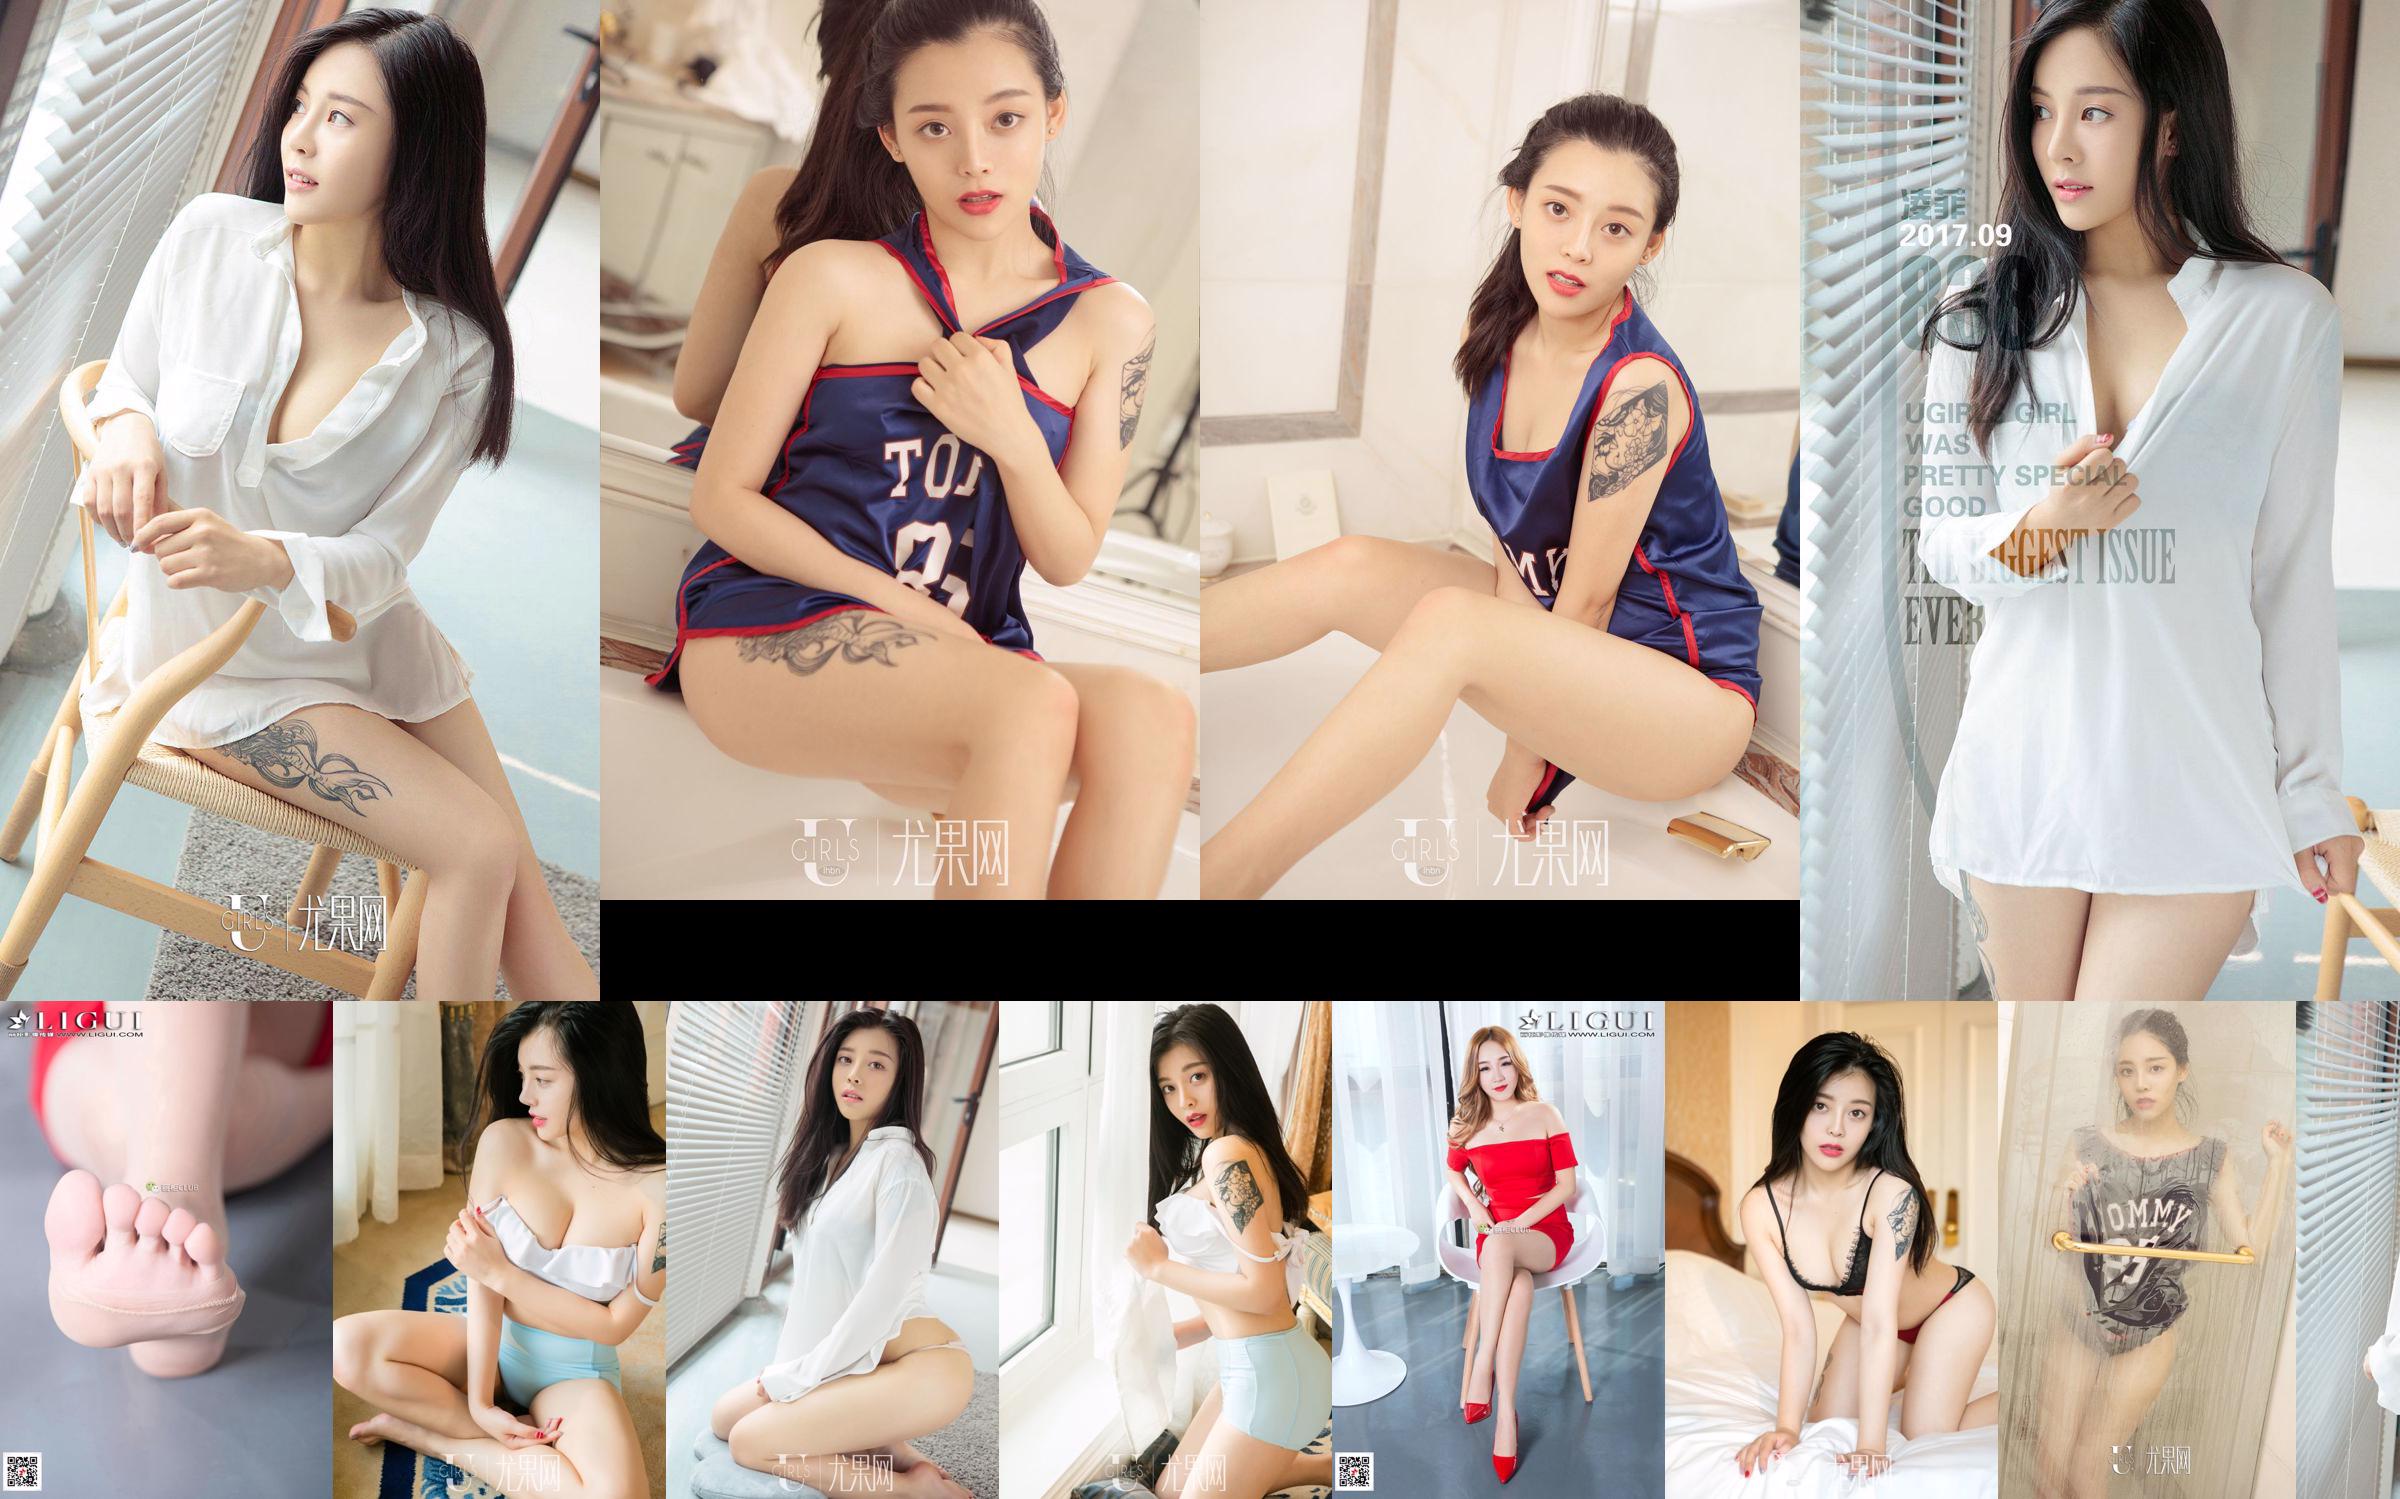 Model Ling Fei "Meat Stockings with Silky Feet and Beautiful Legs" [Ligui Ligui] No.5d8207 Page 3